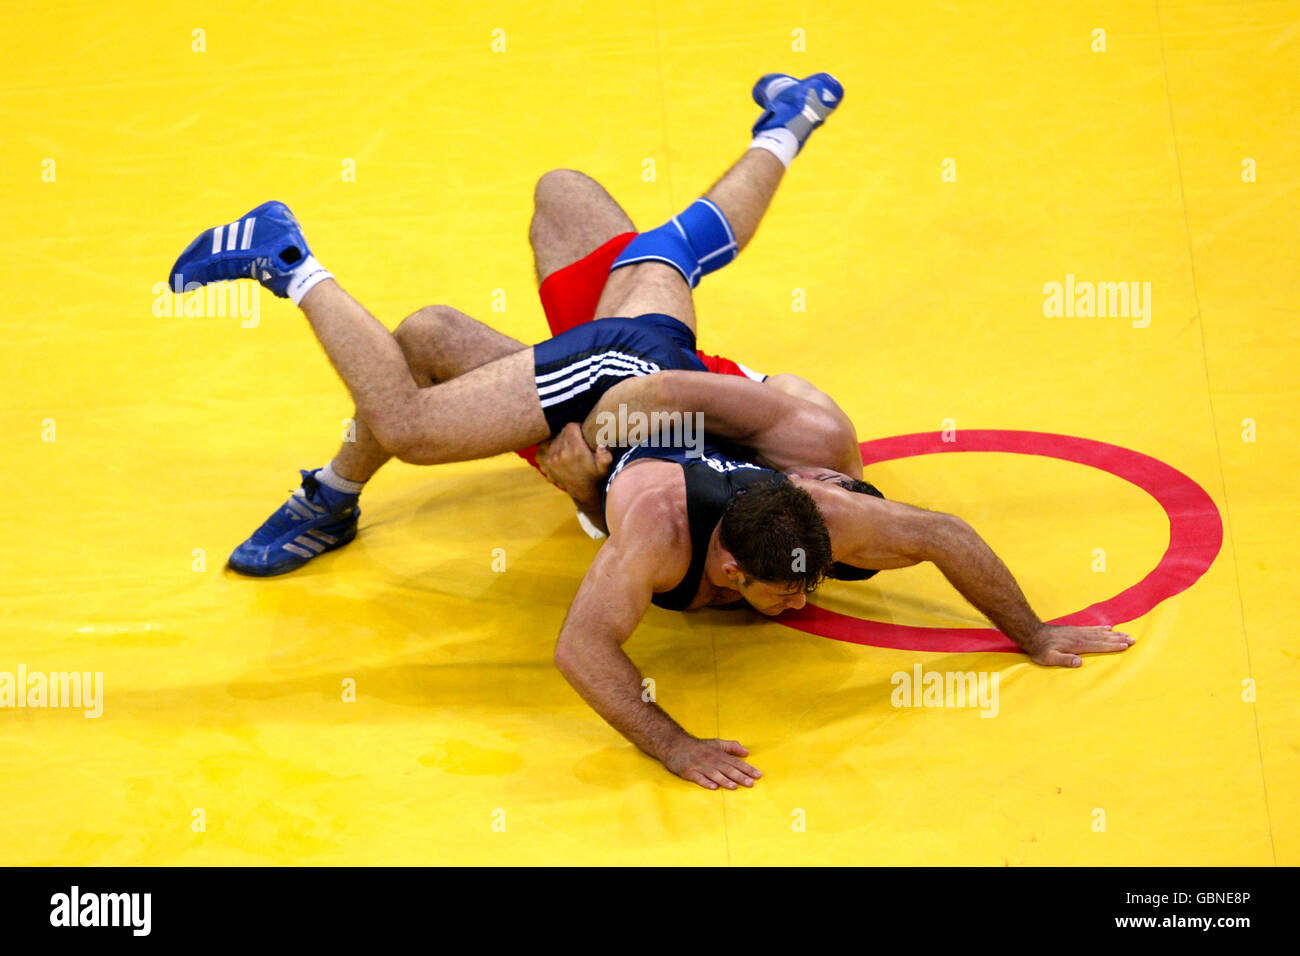 Iran's Masoud Hashemzadeh (red) and Turkey's Mehmet Ozal (blue) battle for the bronze medal Stock Photo